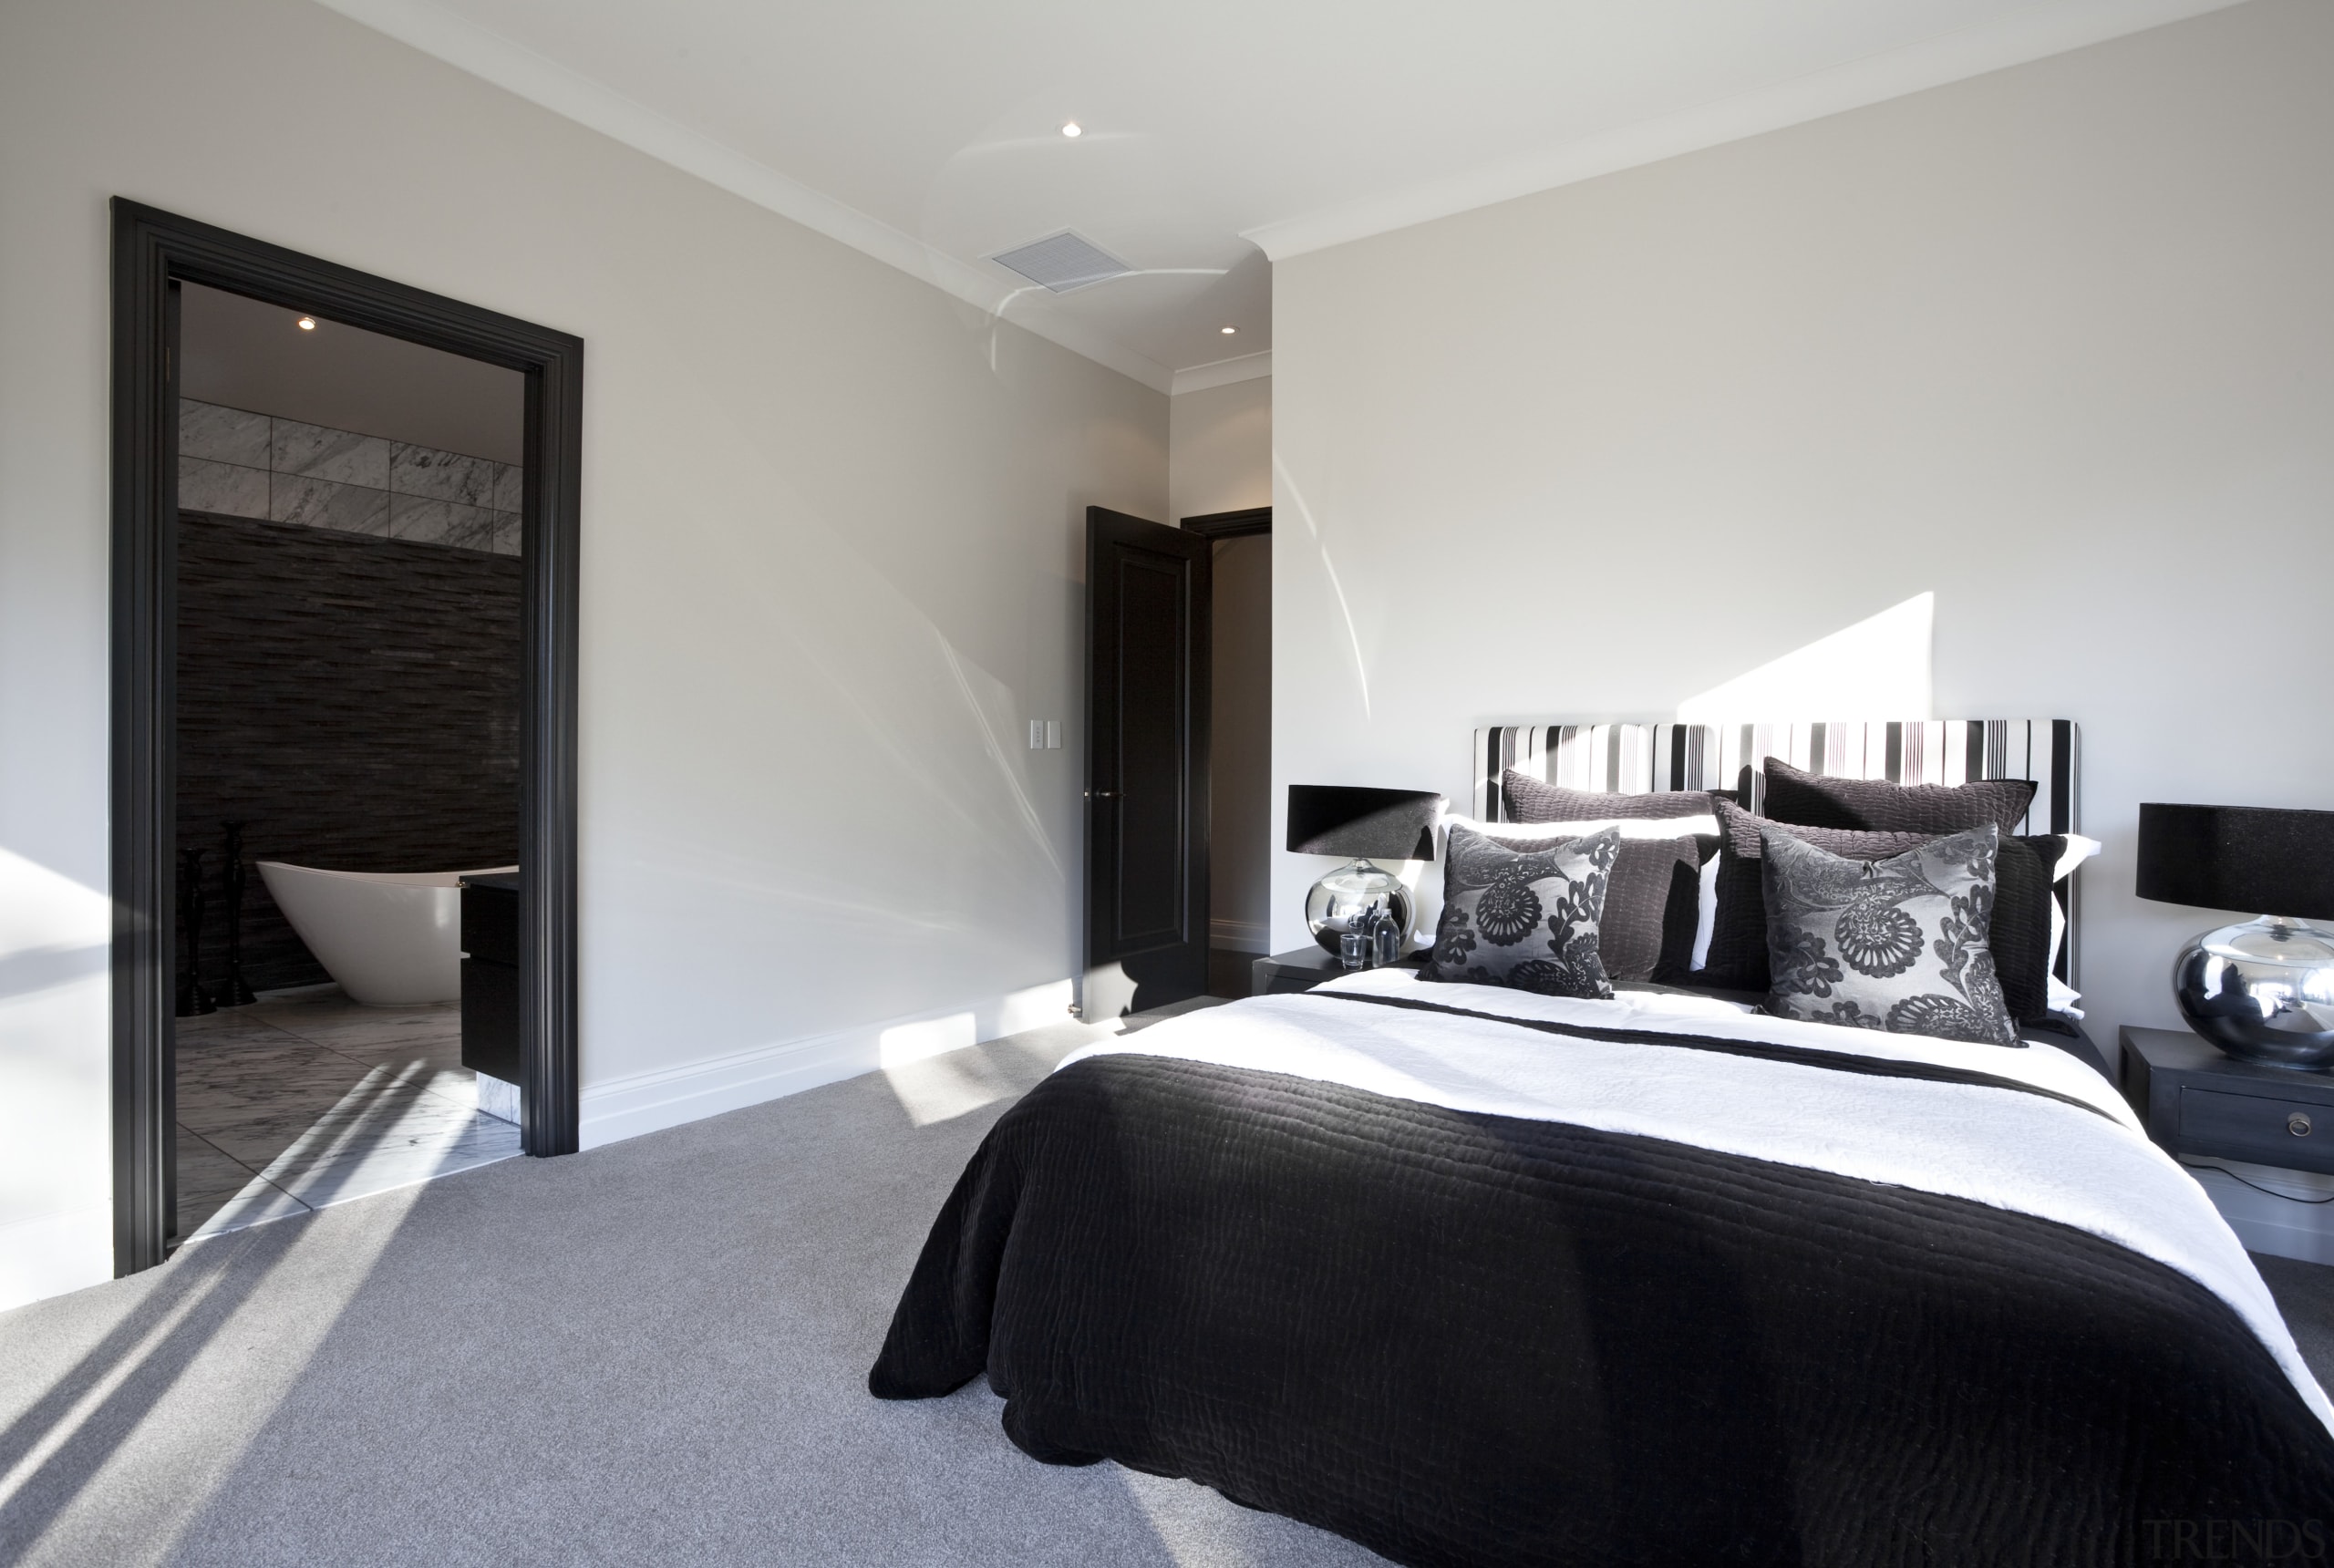 View of bedroom and bathroom with grey, black architecture, bed frame, bedroom, floor, home, interior design, property, real estate, room, suite, wall, window, gray, black